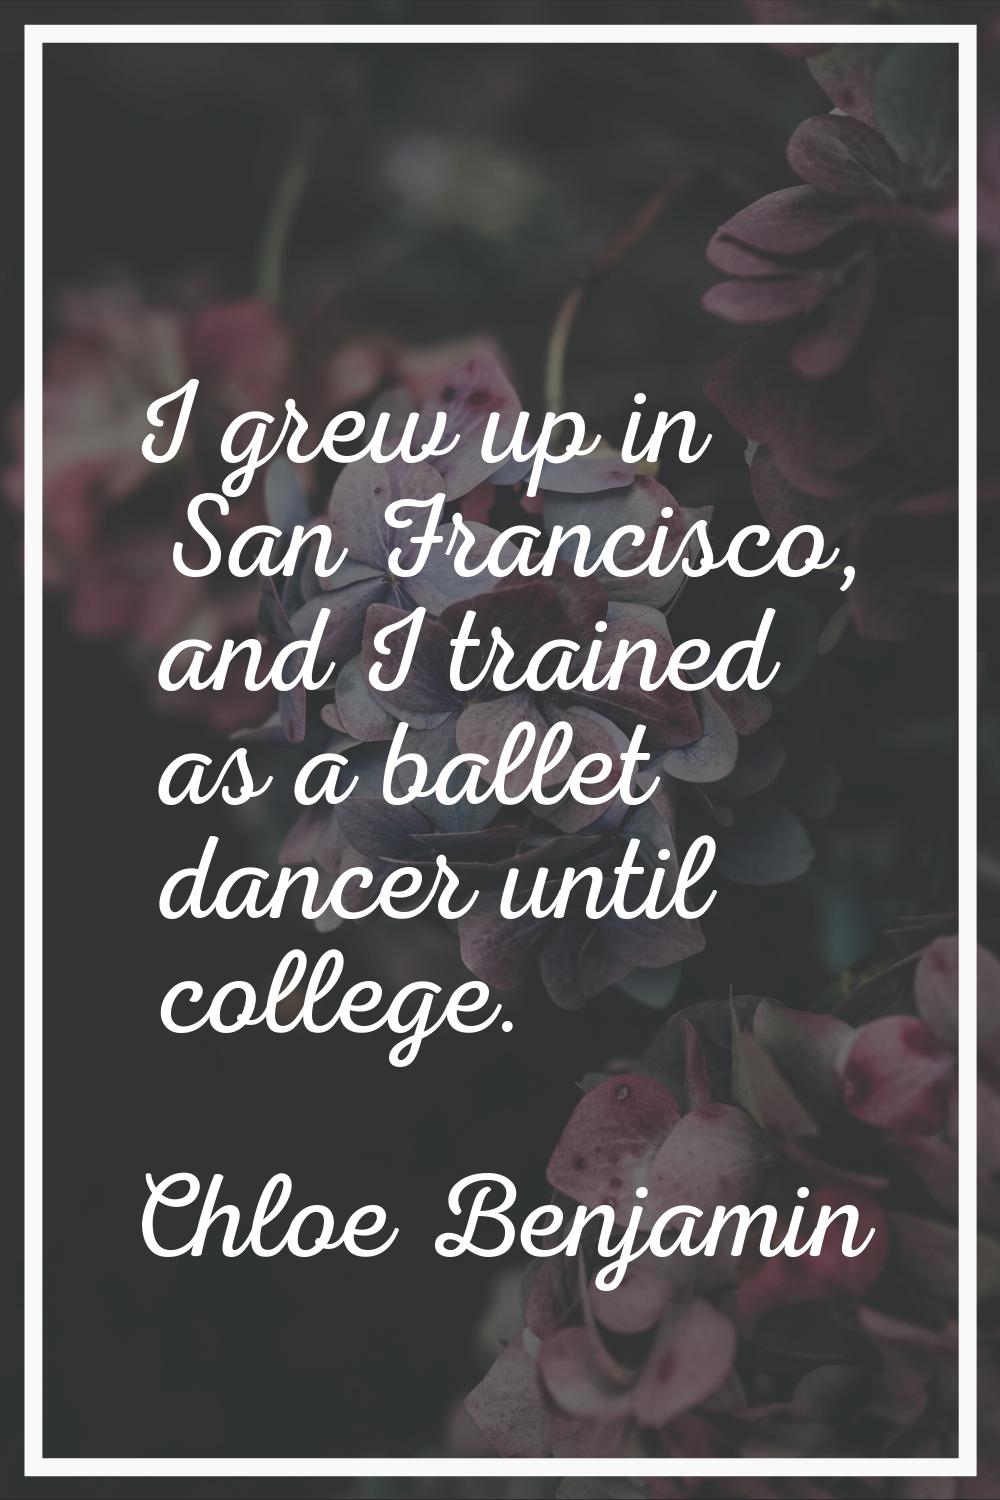 I grew up in San Francisco, and I trained as a ballet dancer until college.